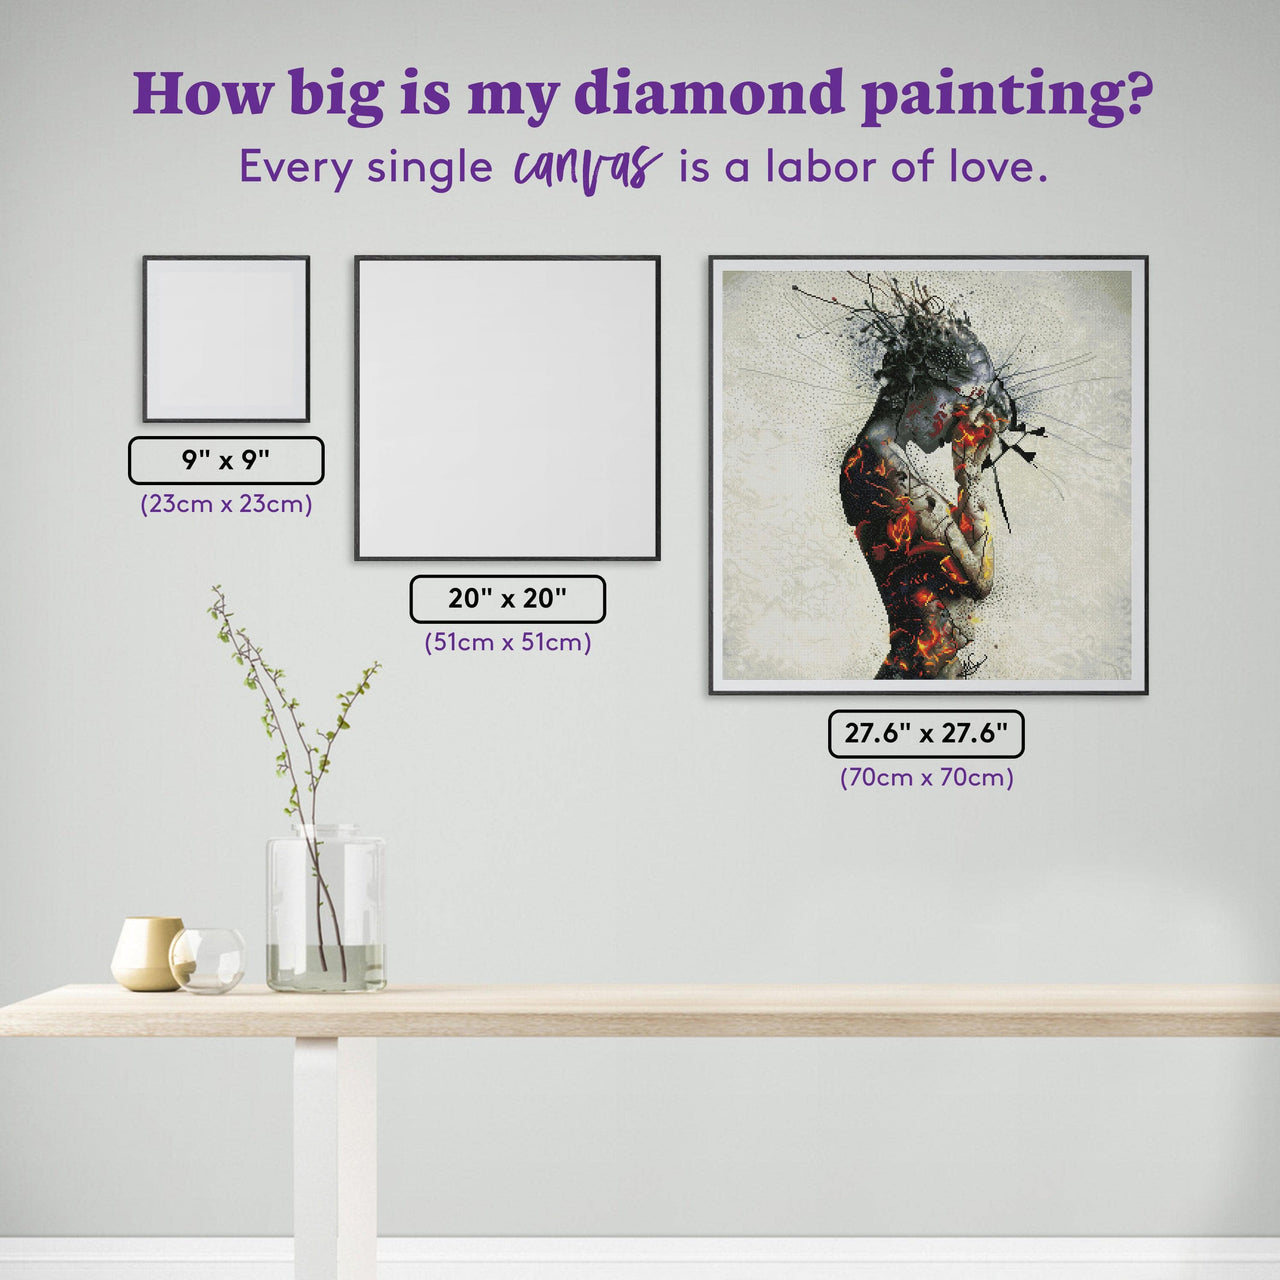 Diamond Painting Deliberation 27.6" x 27.6″ (70cm x 70cm) / Square with 37 Colors including 2 ABs / 76,718